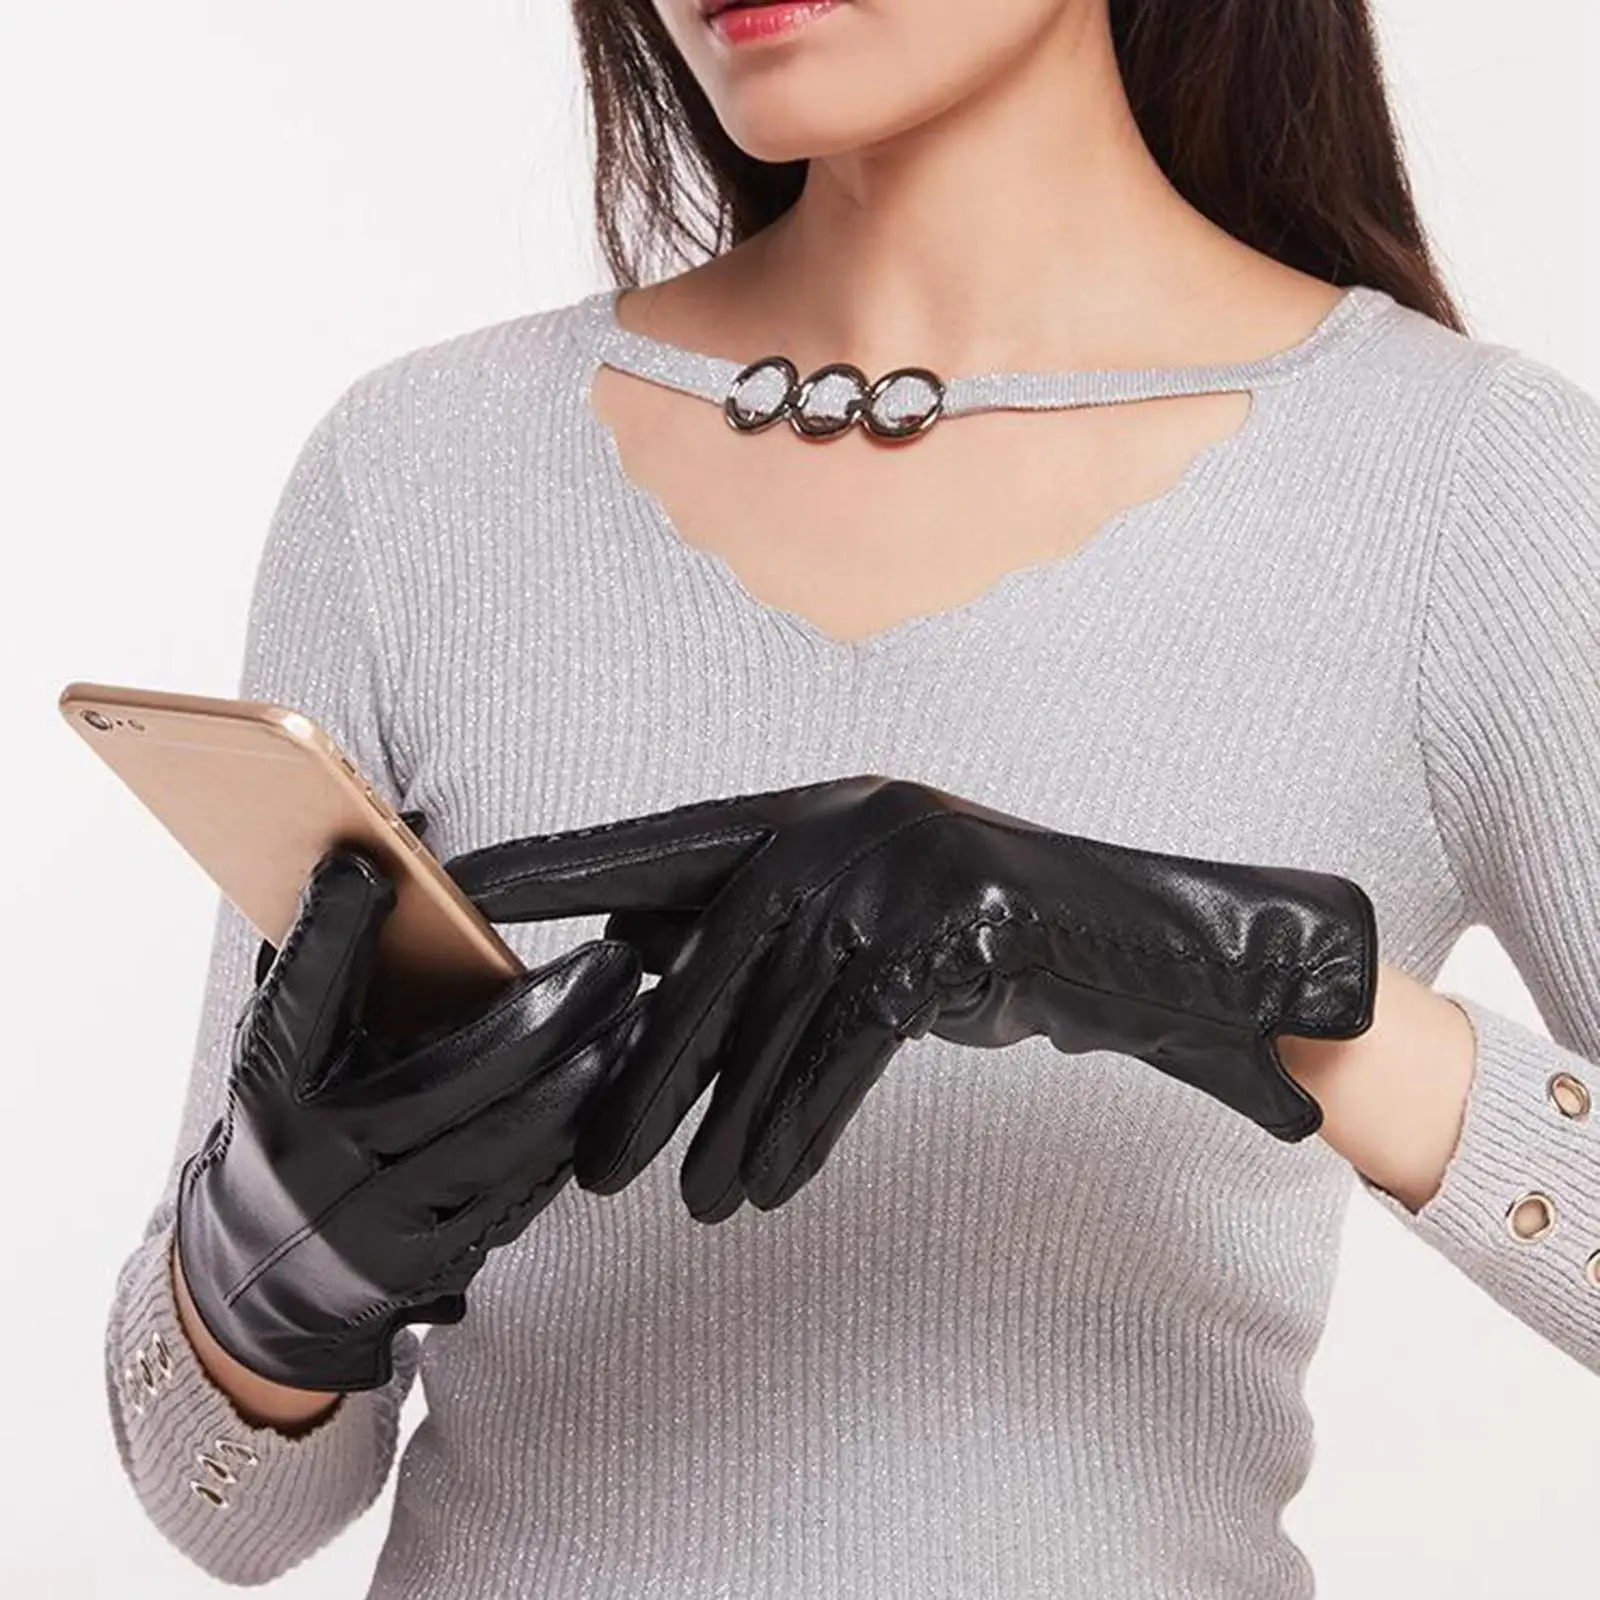 Winter Leather Gloves for Women, Touchscreen Texting Gloves with Thermal Cashmere Lining, Fashion Driving Gloves